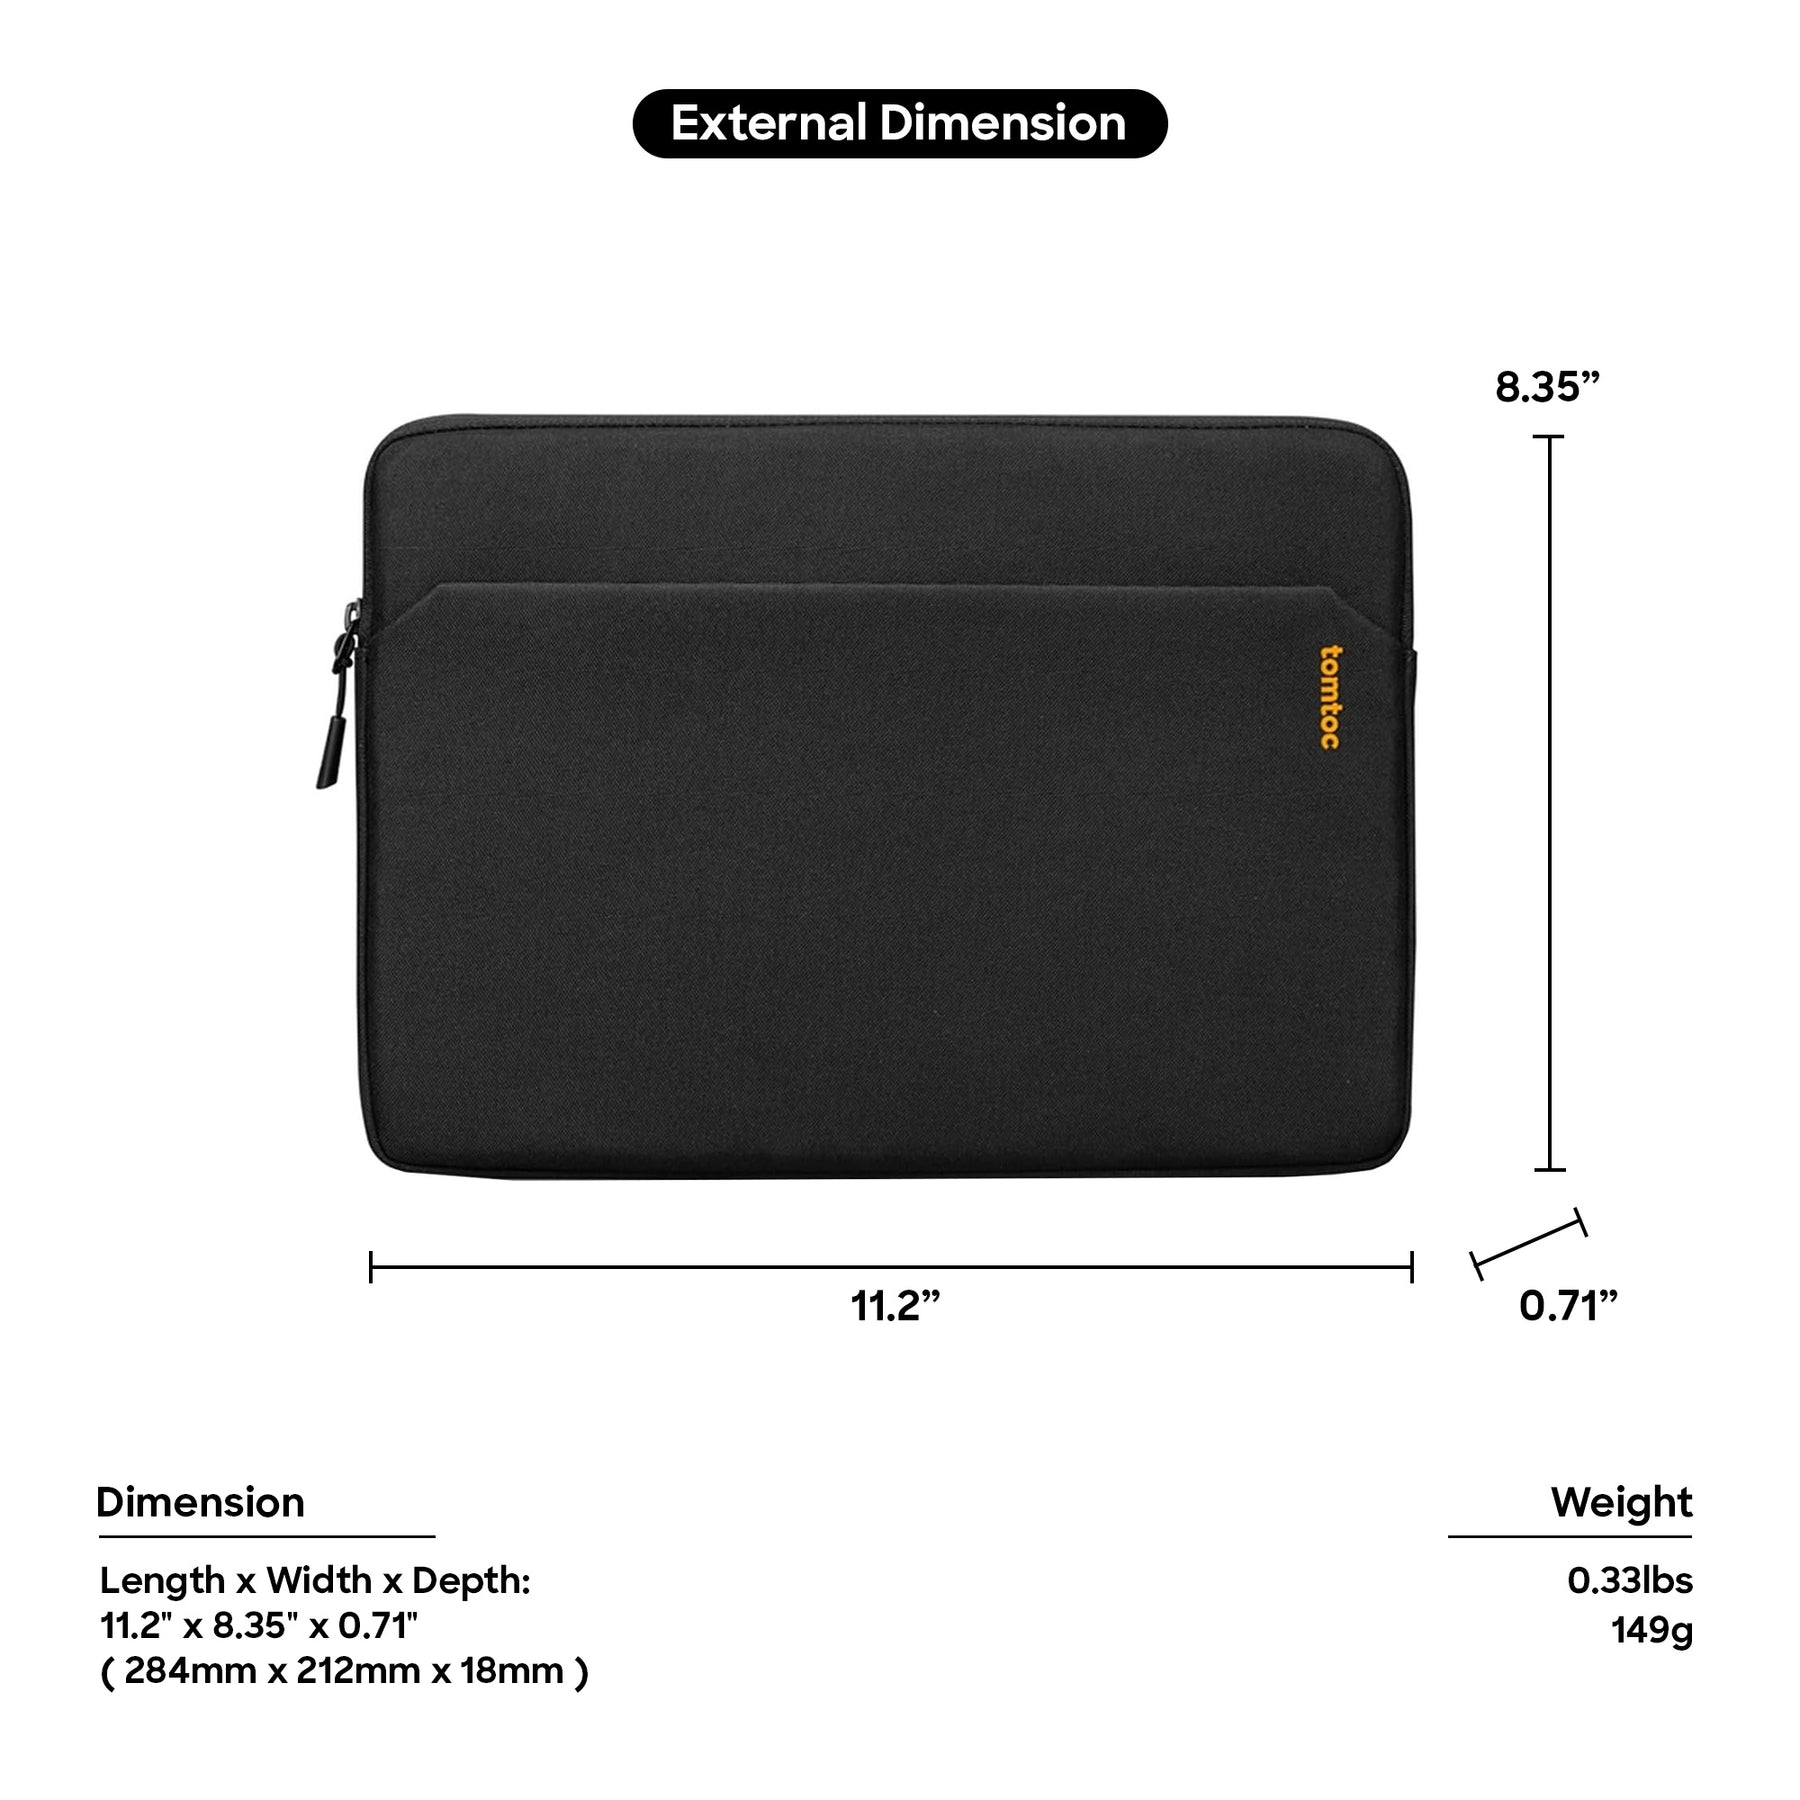 tomtoc 11 Inch Tablet Sleeve Bag - Light Gray